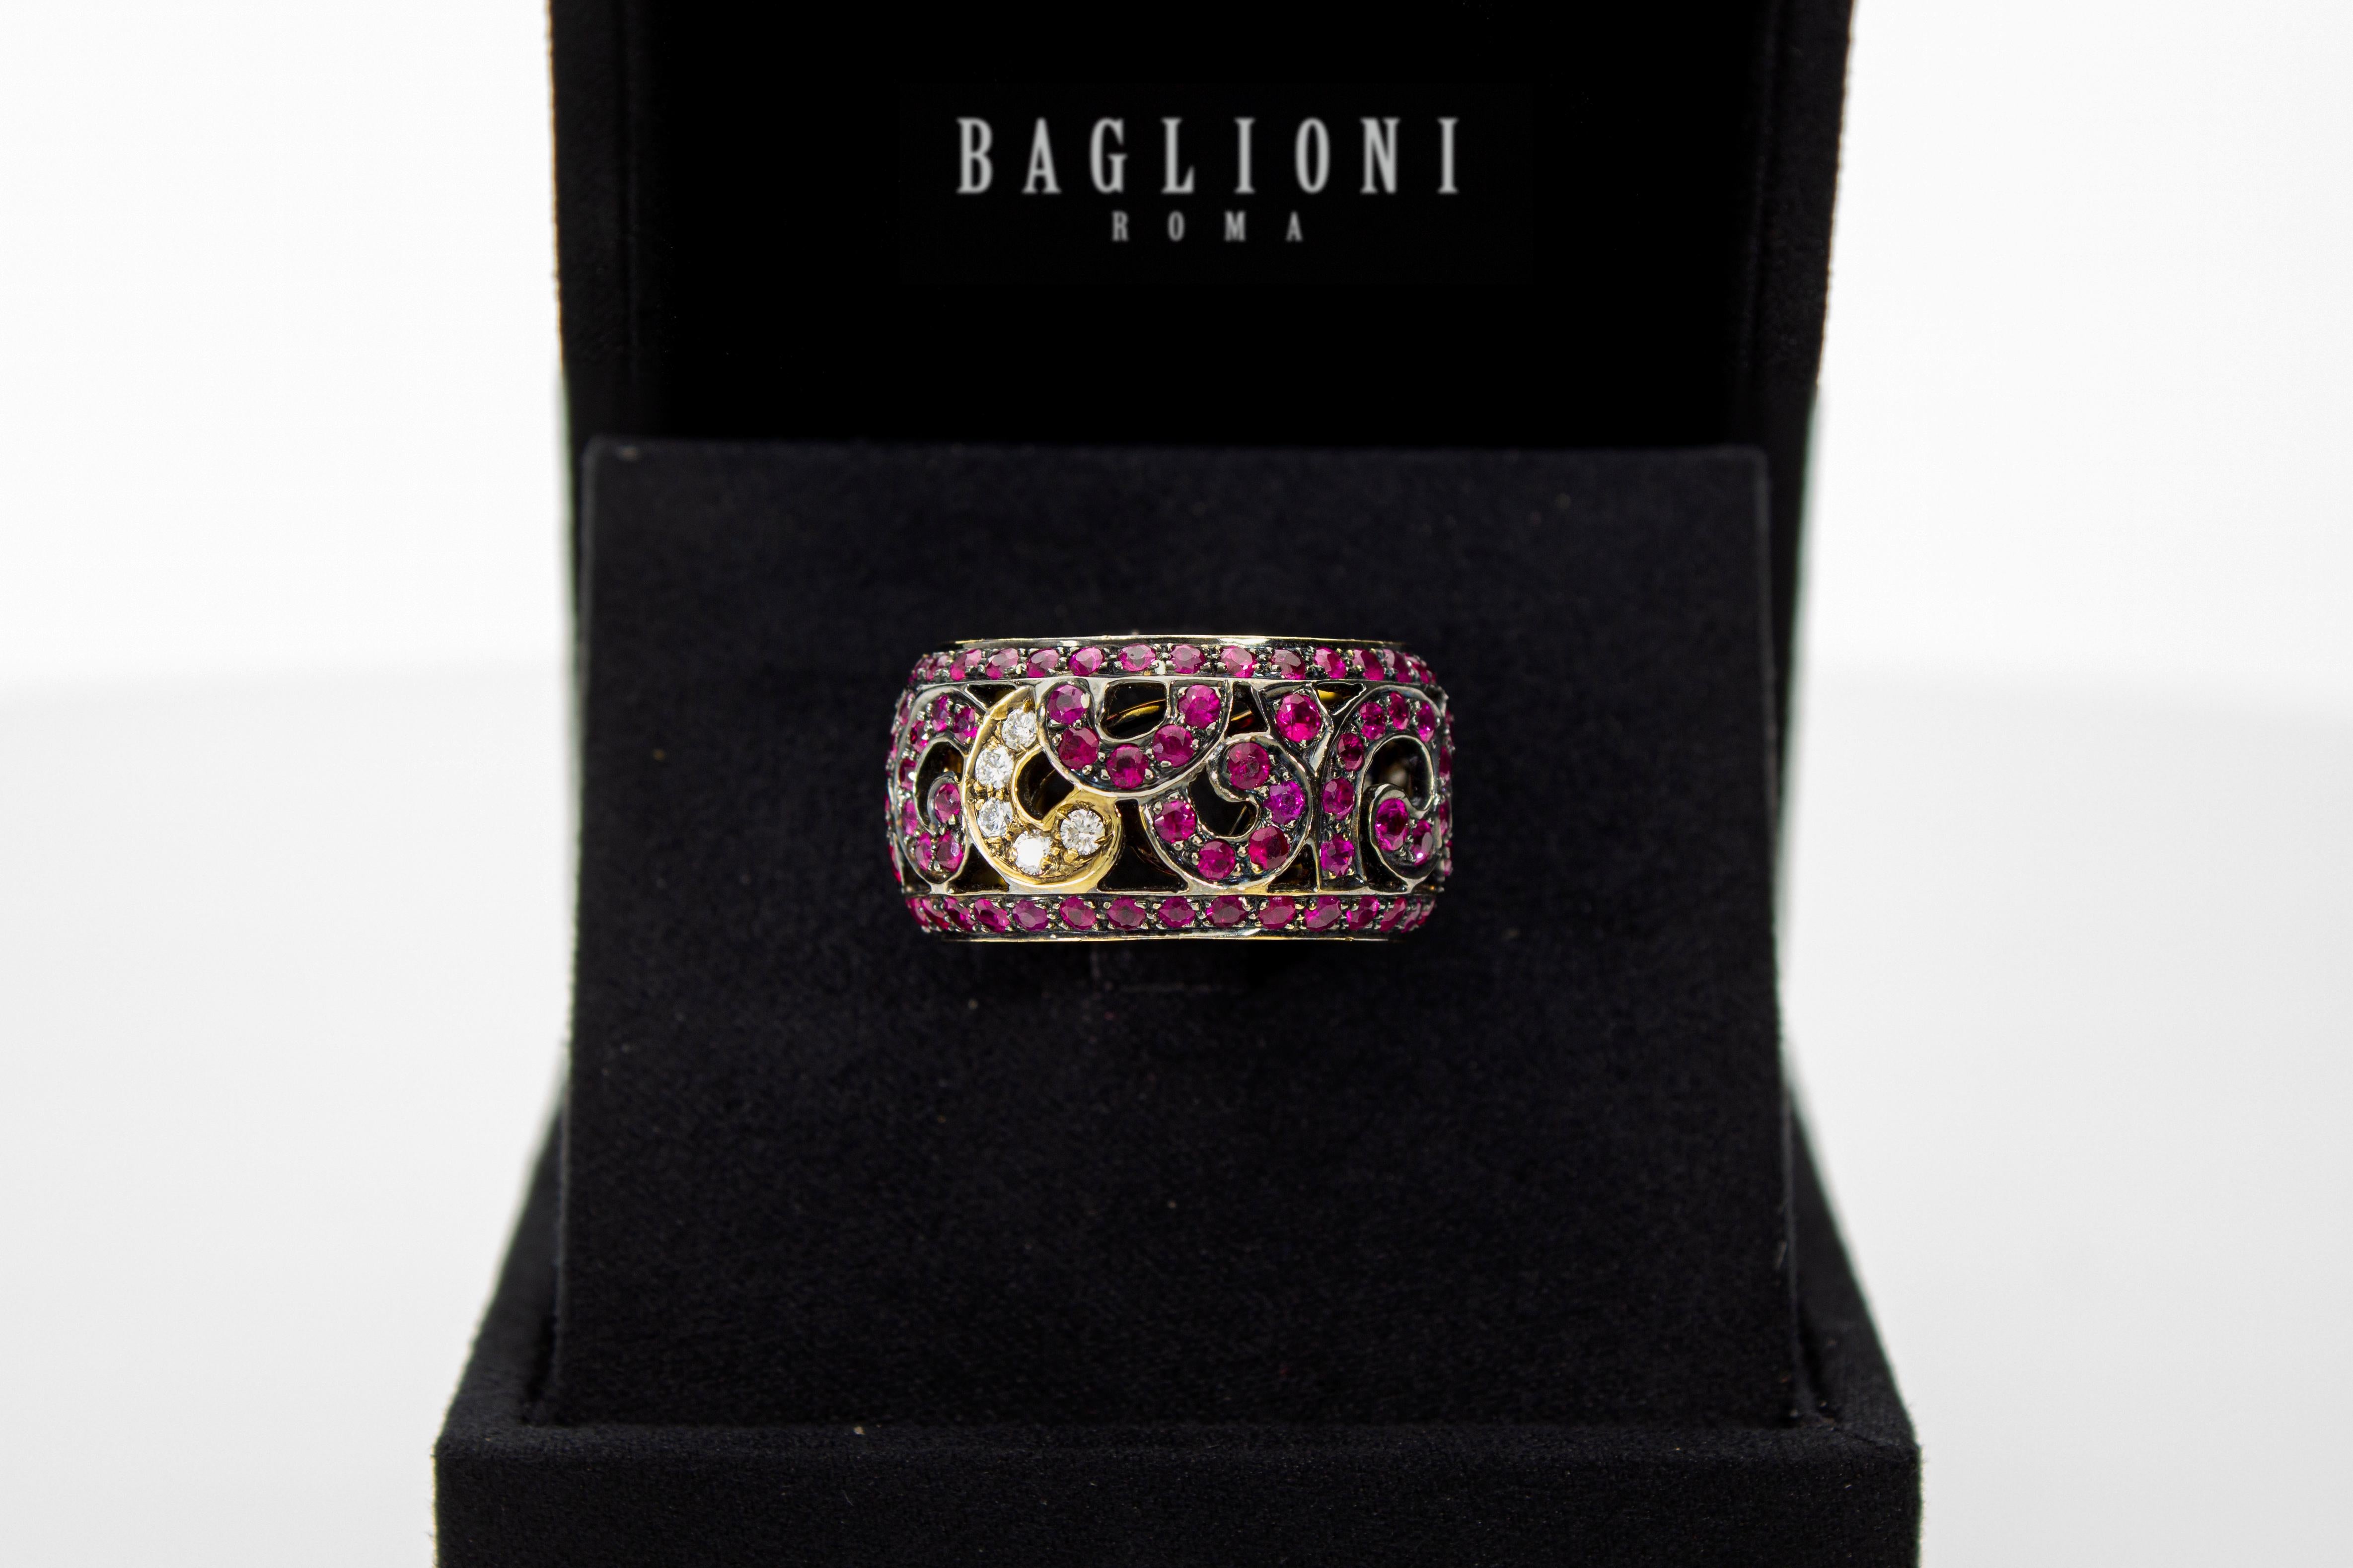 Round Cut Eternity Band Ring with 4.13 ct of Rubies and 0.25 ct of Diamonds. Made in Italy For Sale